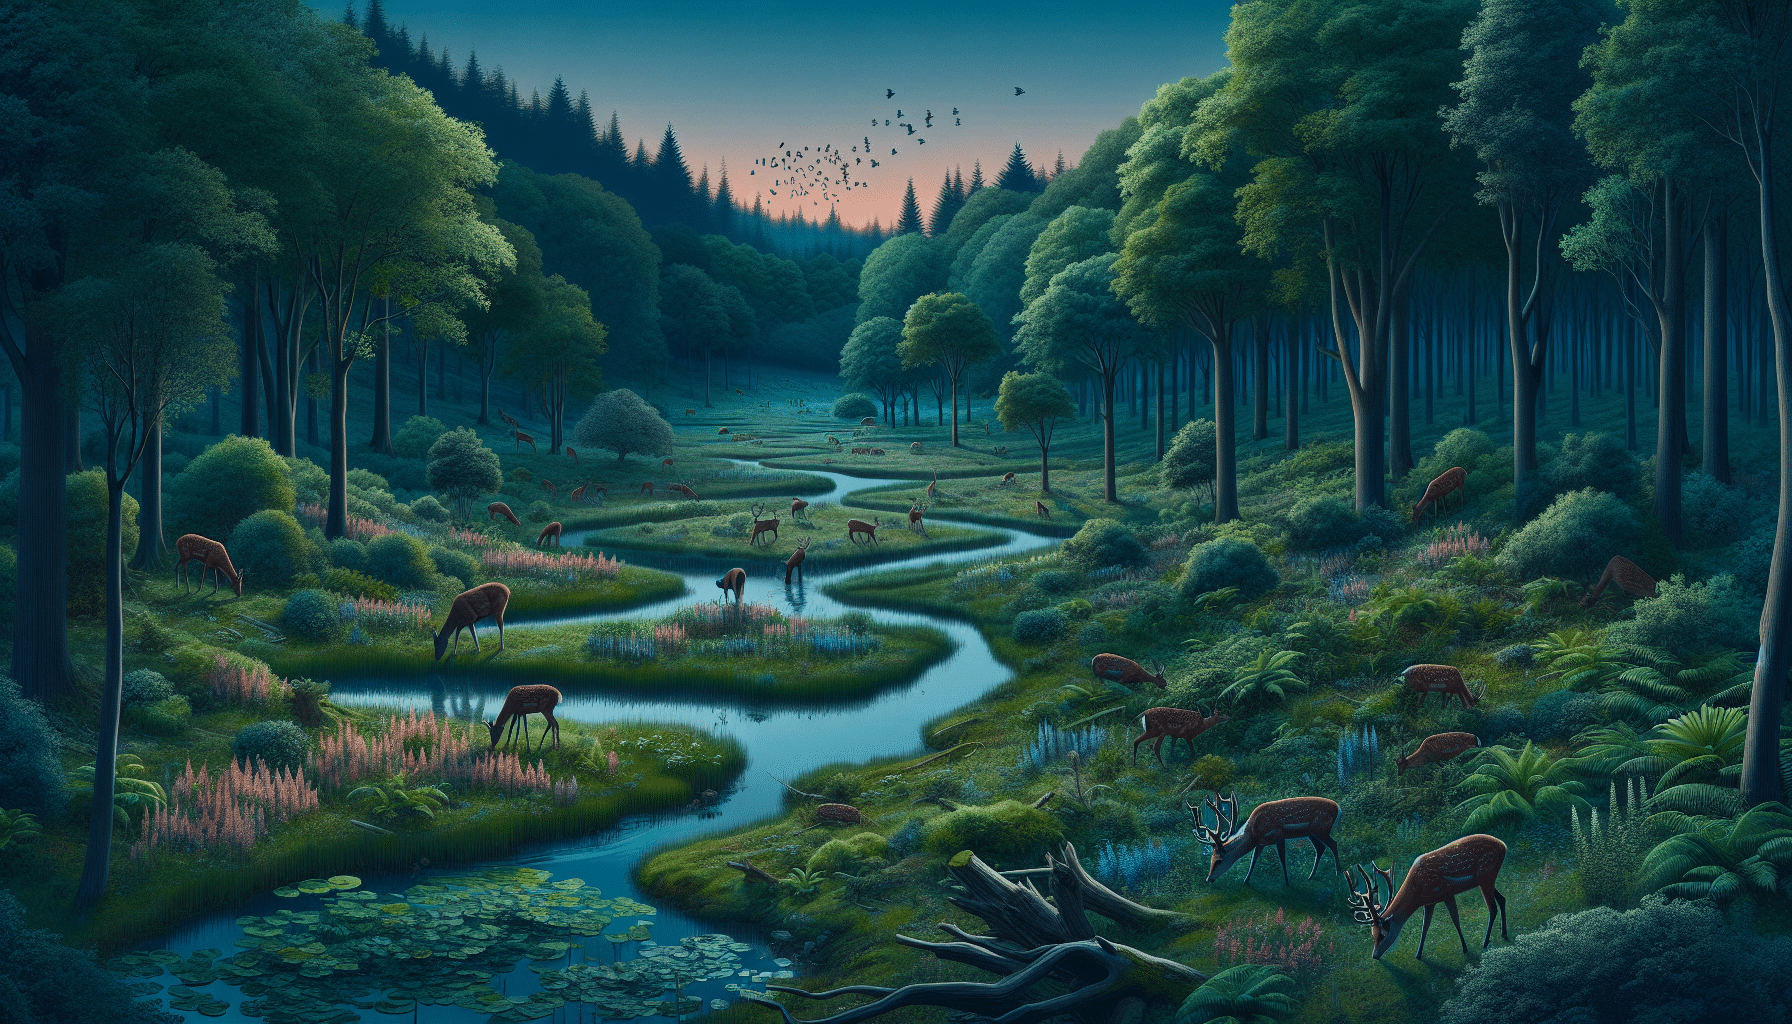 A serene forest landscape at dusk showing a vibrant ecosystem. A large herd of deer grazing peacefully near a meandering brook and a variety of flora in different stages of growth hint at the lushness of nature. The sheer number of deer gives a sense of overpopulation. Subtle indications of imbalance, like chewed bark and overgrazed areas, subtly point to the problems caused by excessive deer population. Aim for subtlety with these elements so as not to overshadow the scenic beauty.